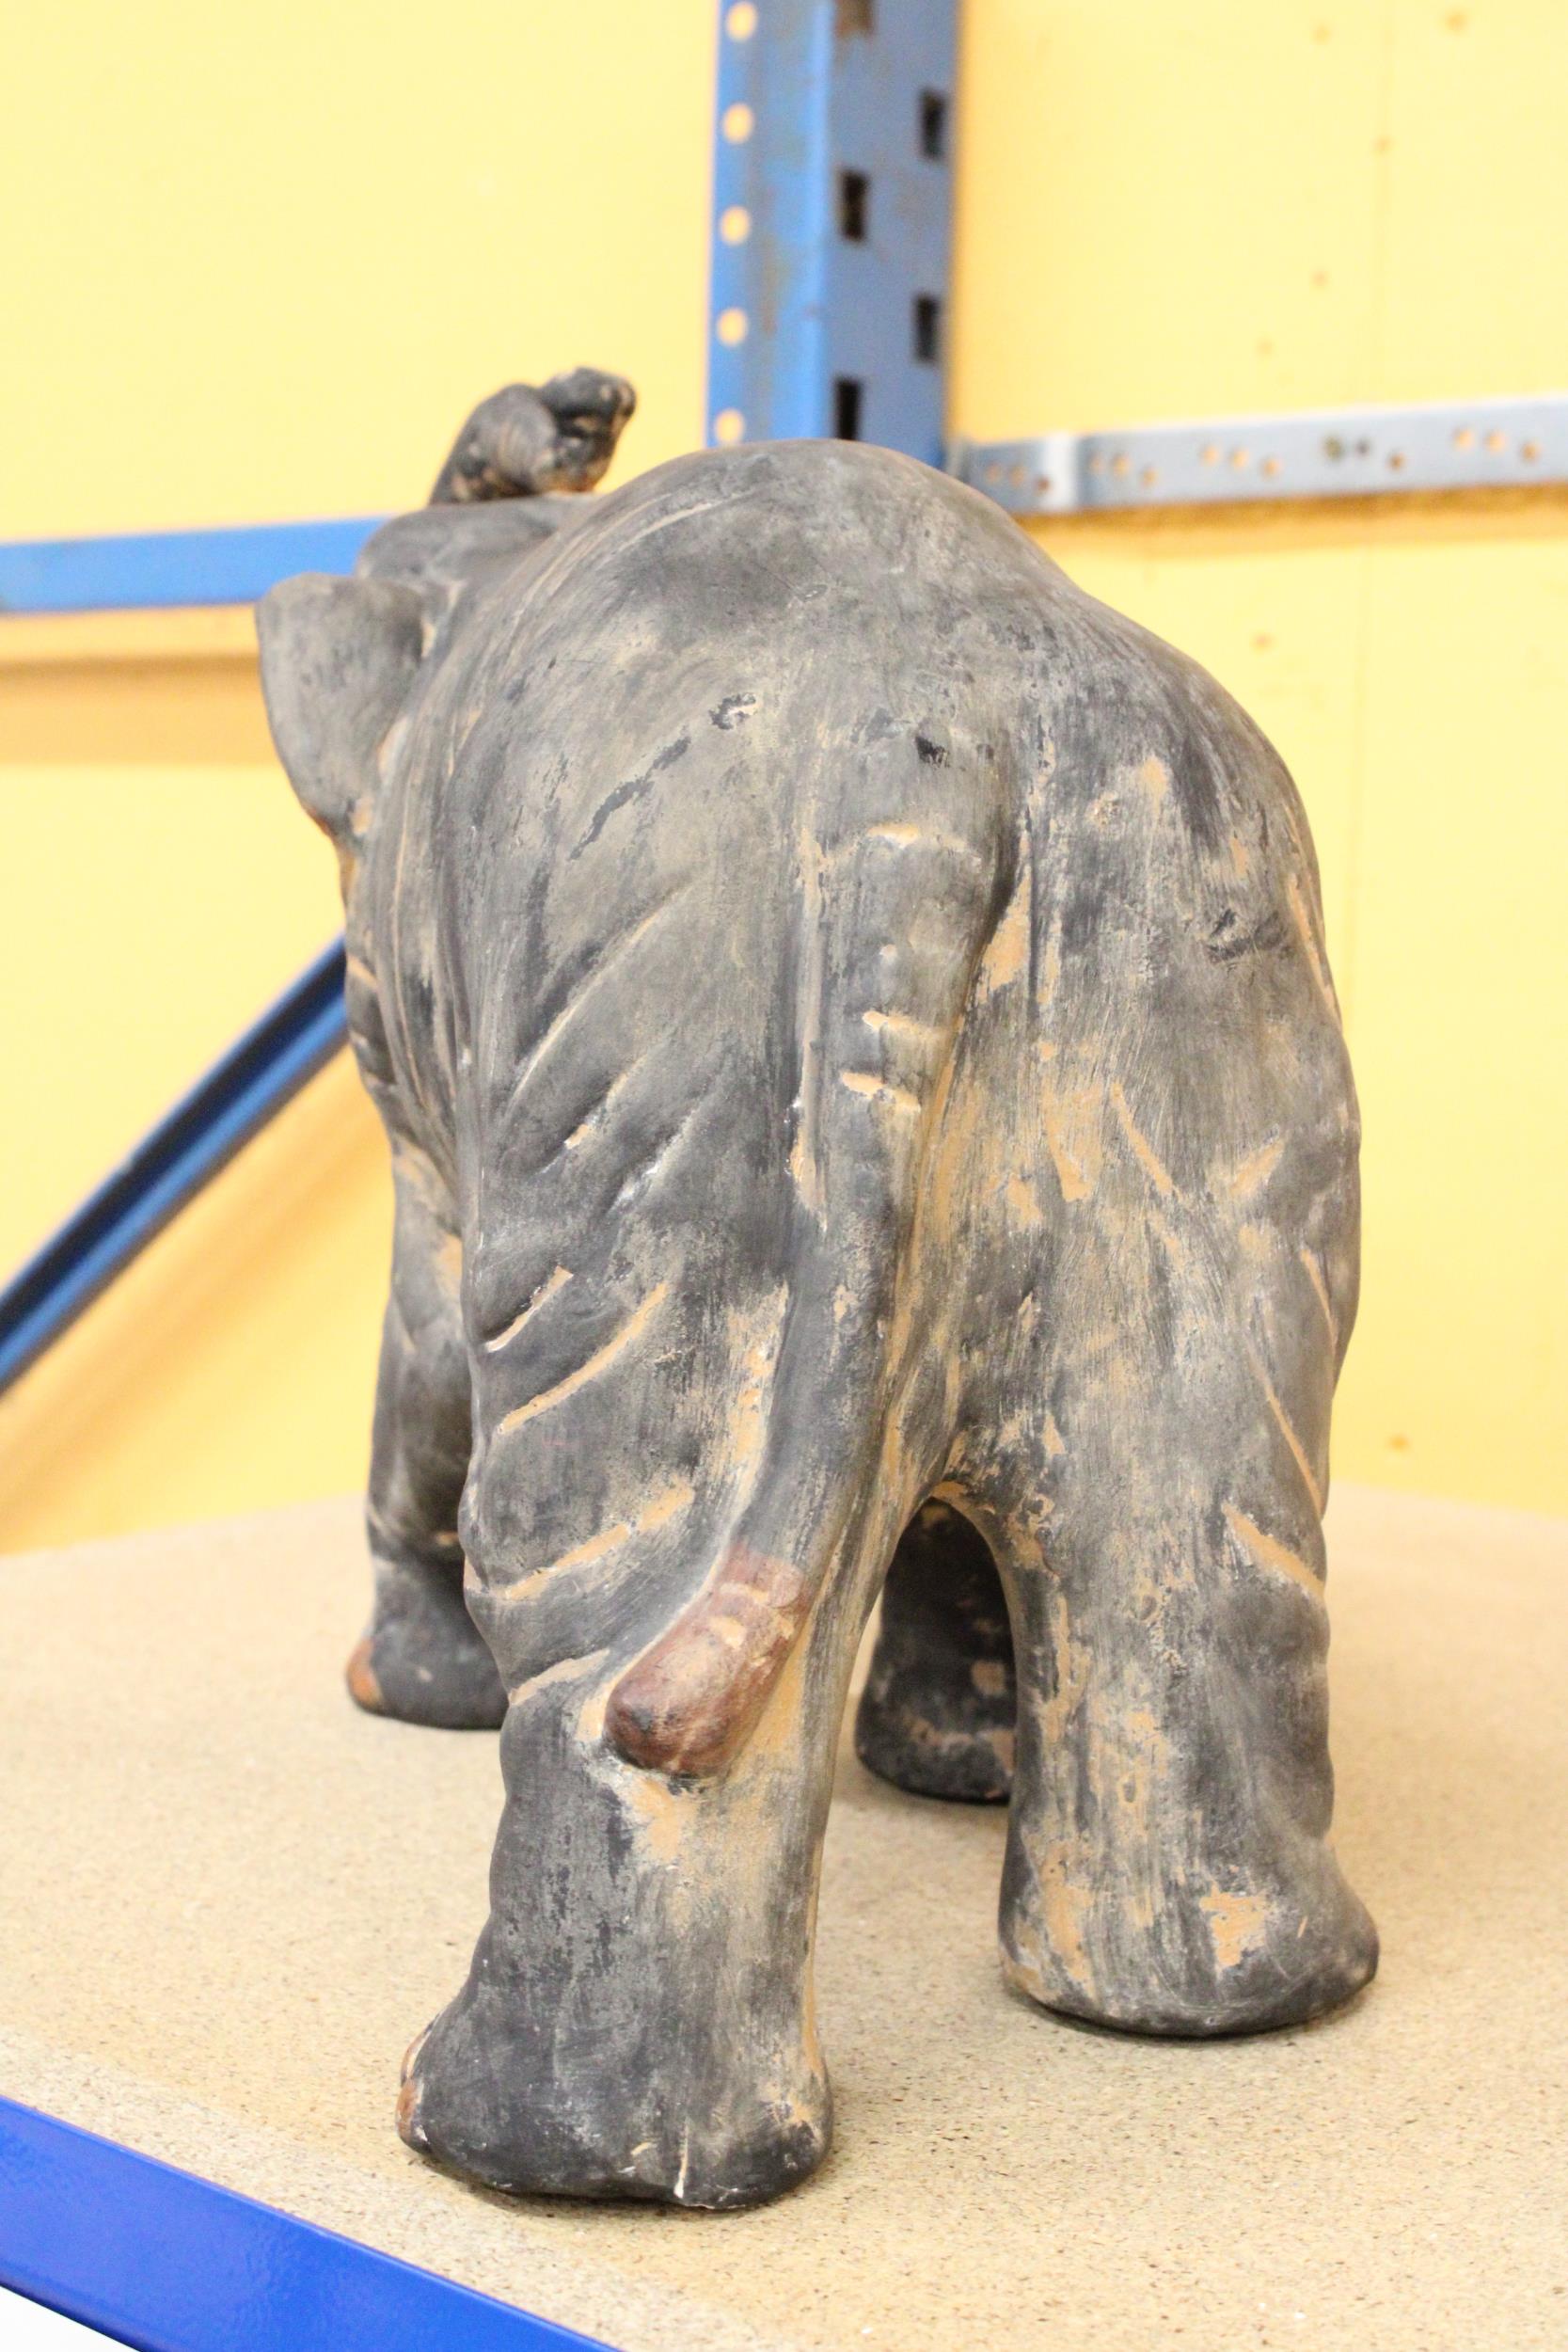 A LARGE STONE WARE ELEPHANT ORNAMENT - Image 4 of 4